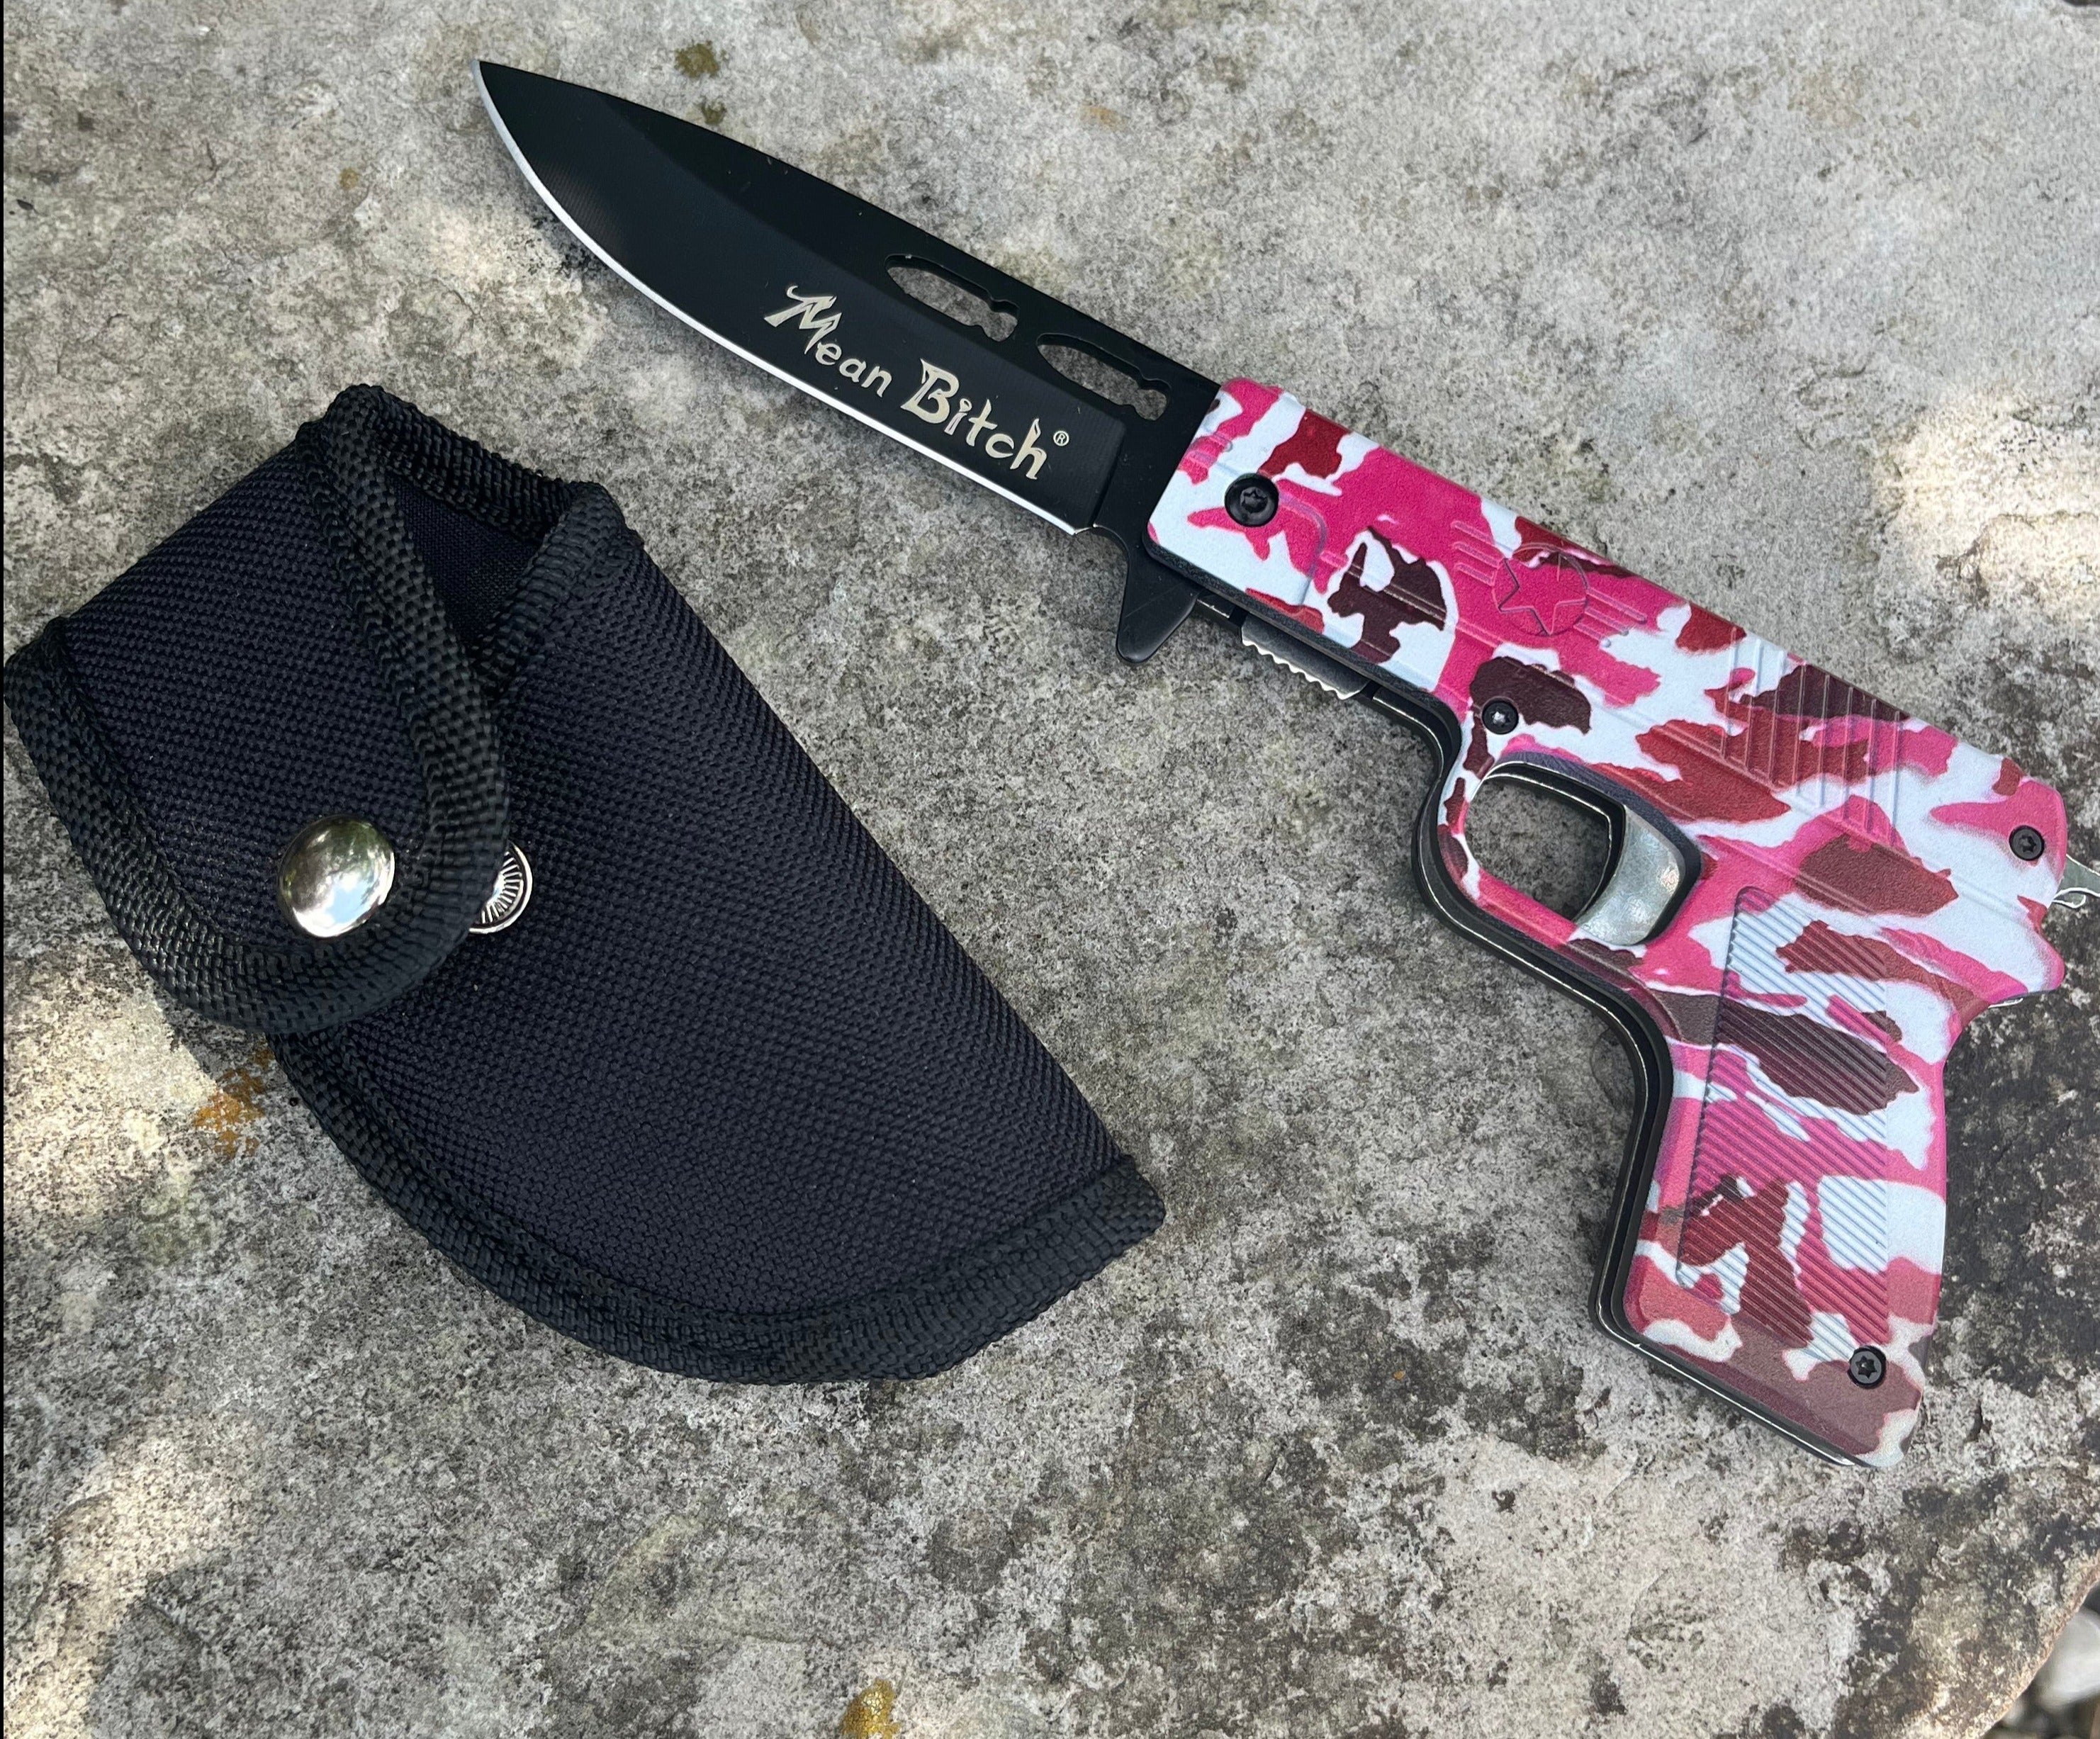 Pink Camo Mean Bitch Knife – Blades For Babes